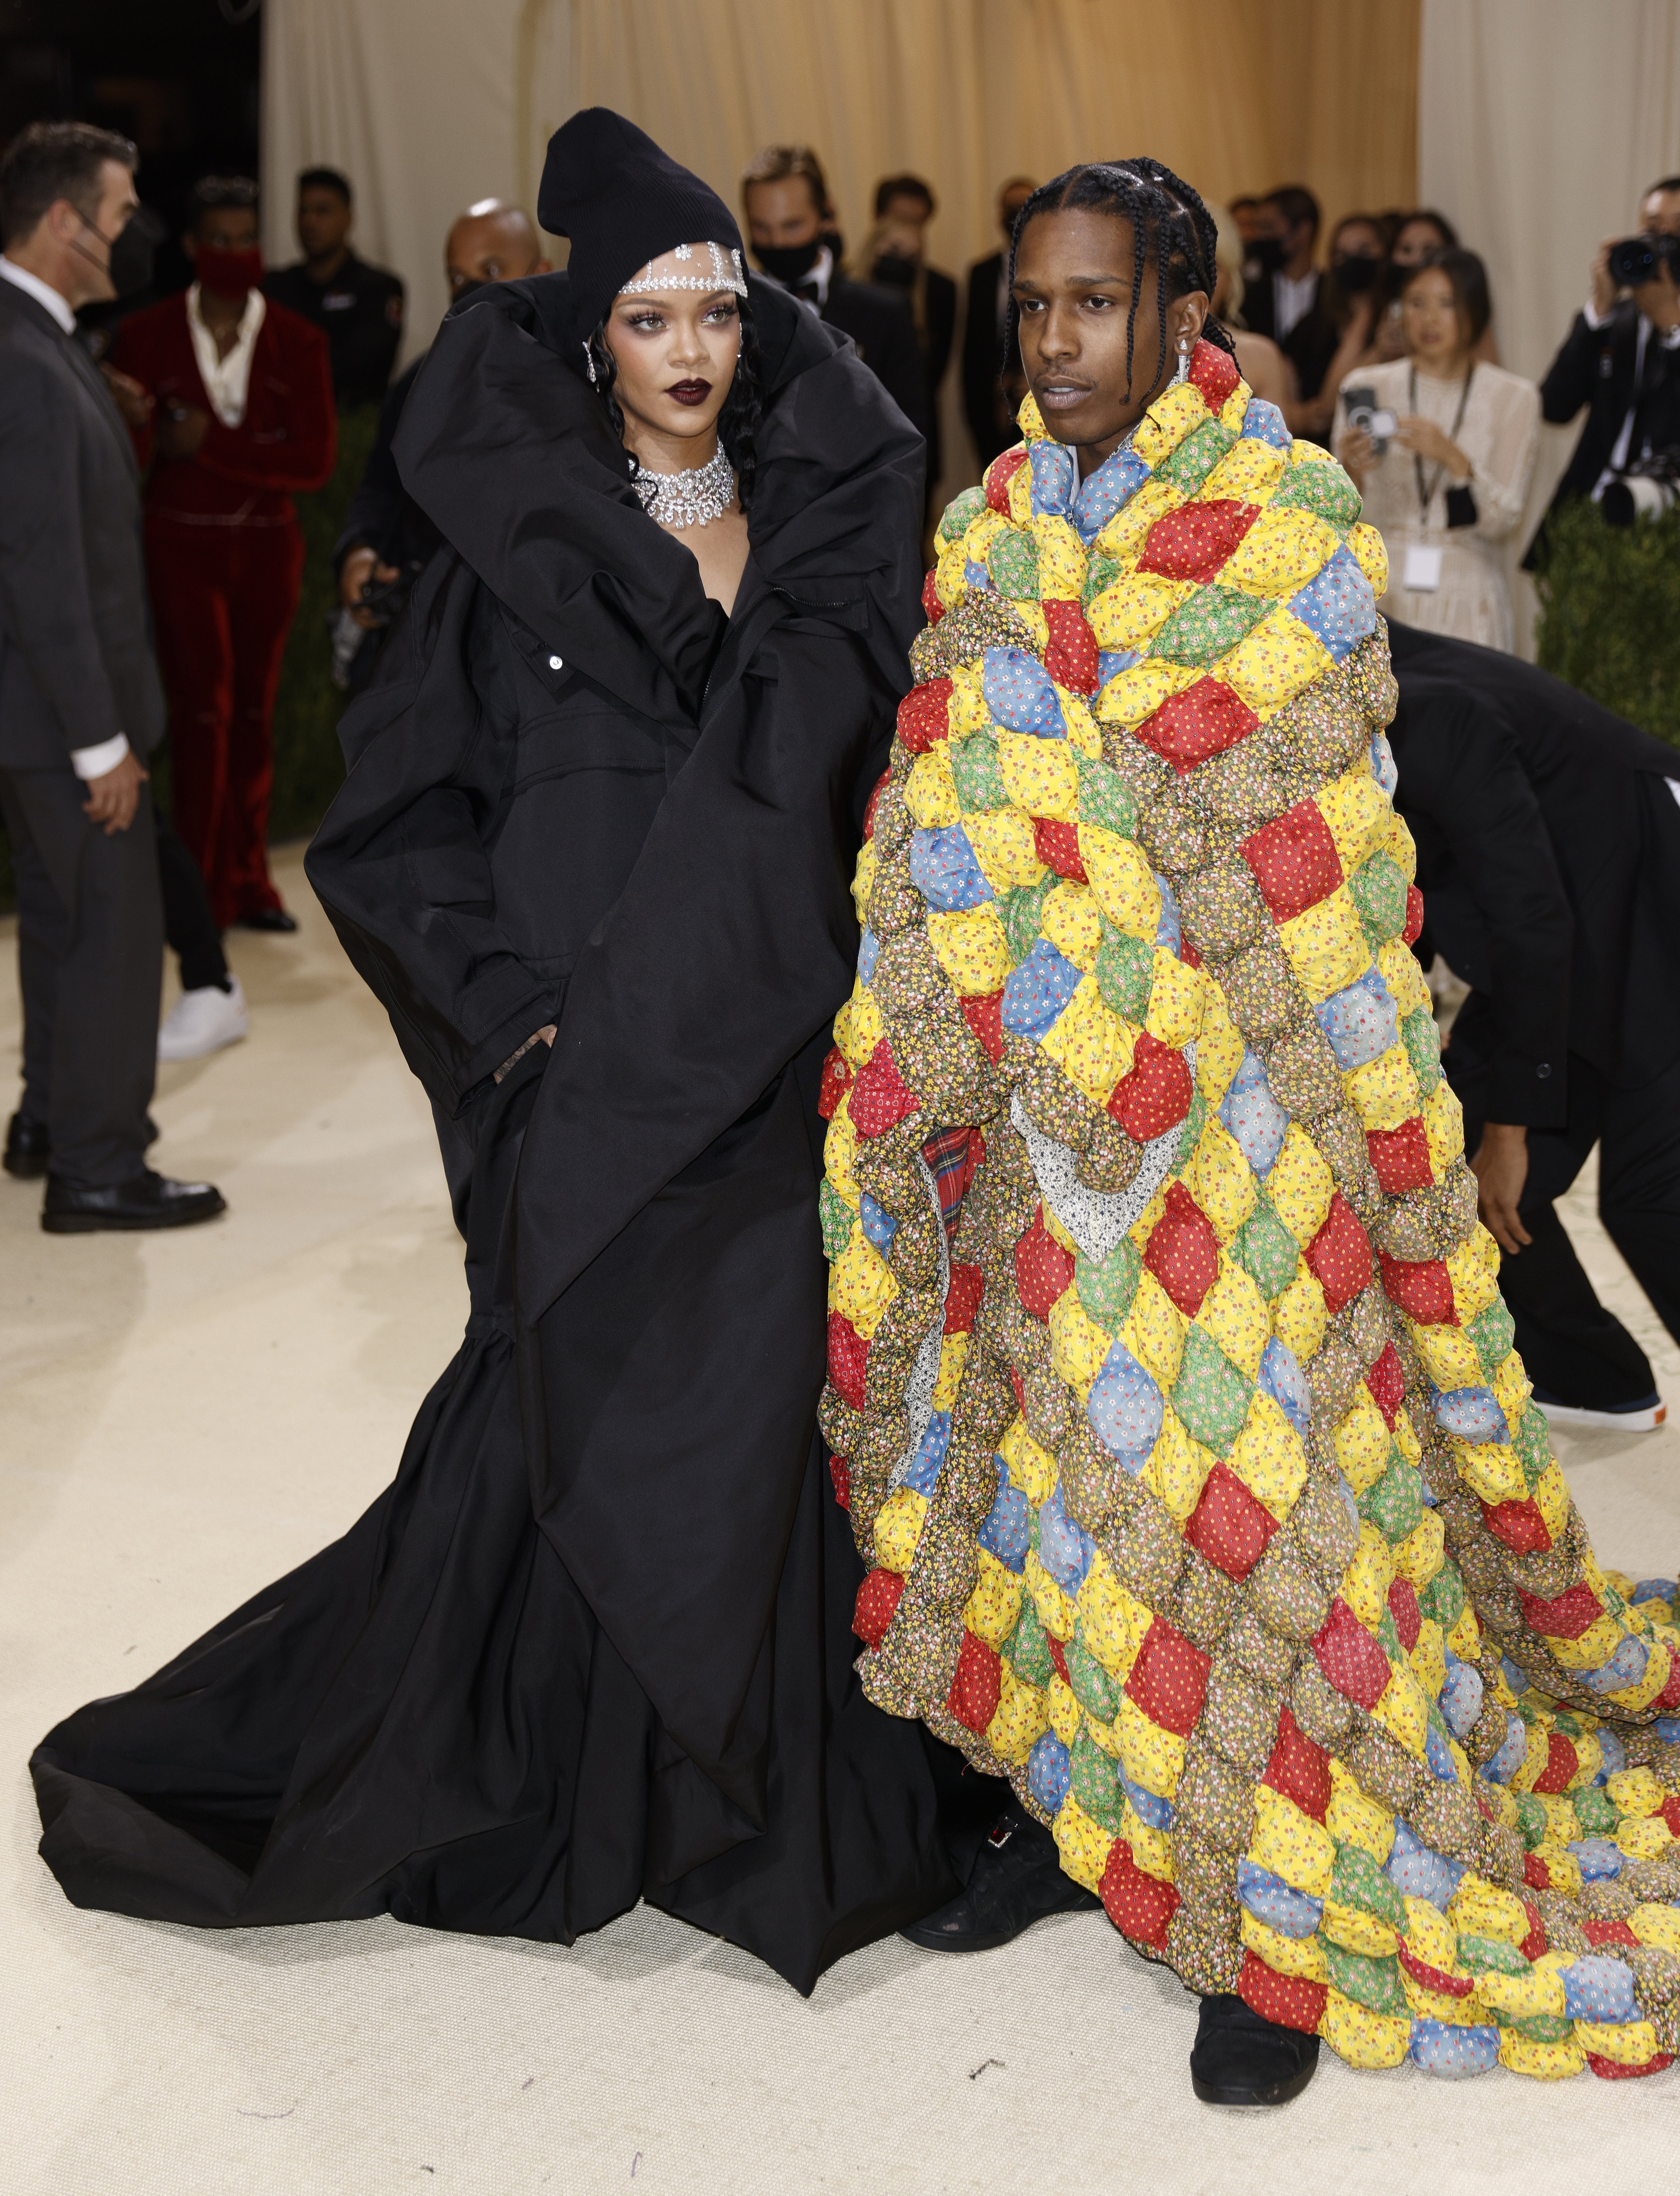 Rihanna And A$AP Rocky at the Met Gala 2021.